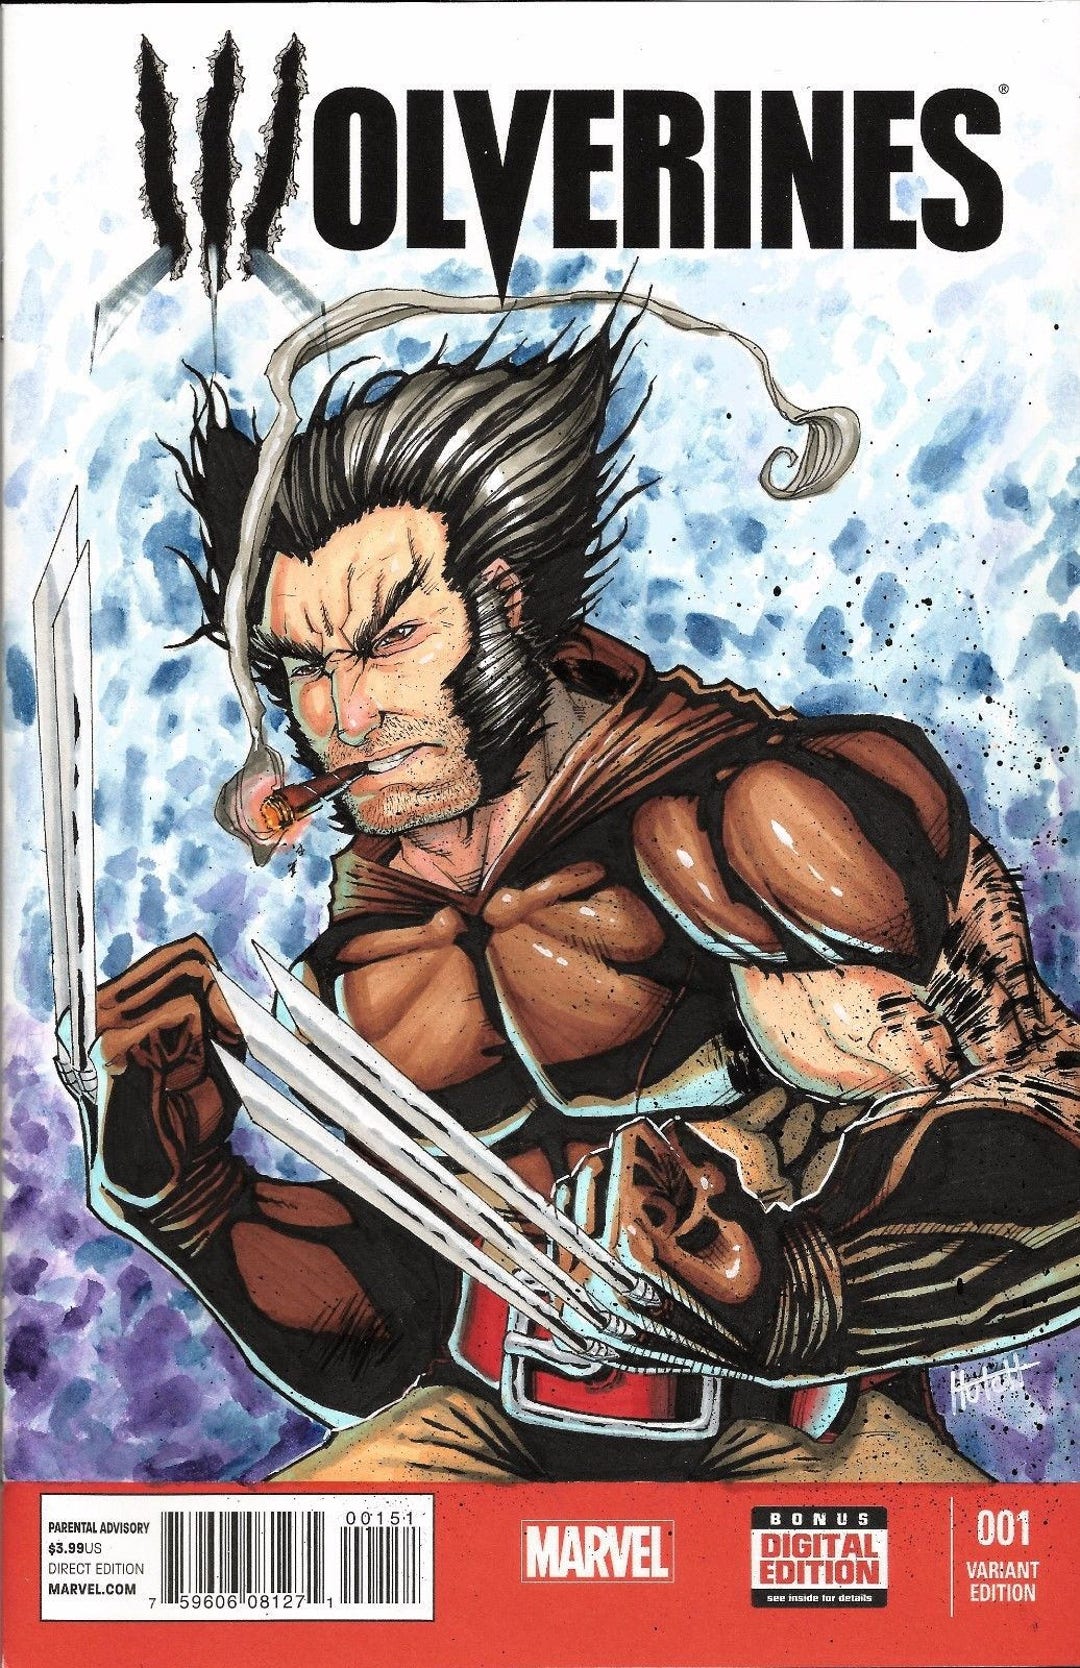 Wolverine Pencil Sketch, in Eric Matos's My Art For Sale Comic Art Gallery  Room